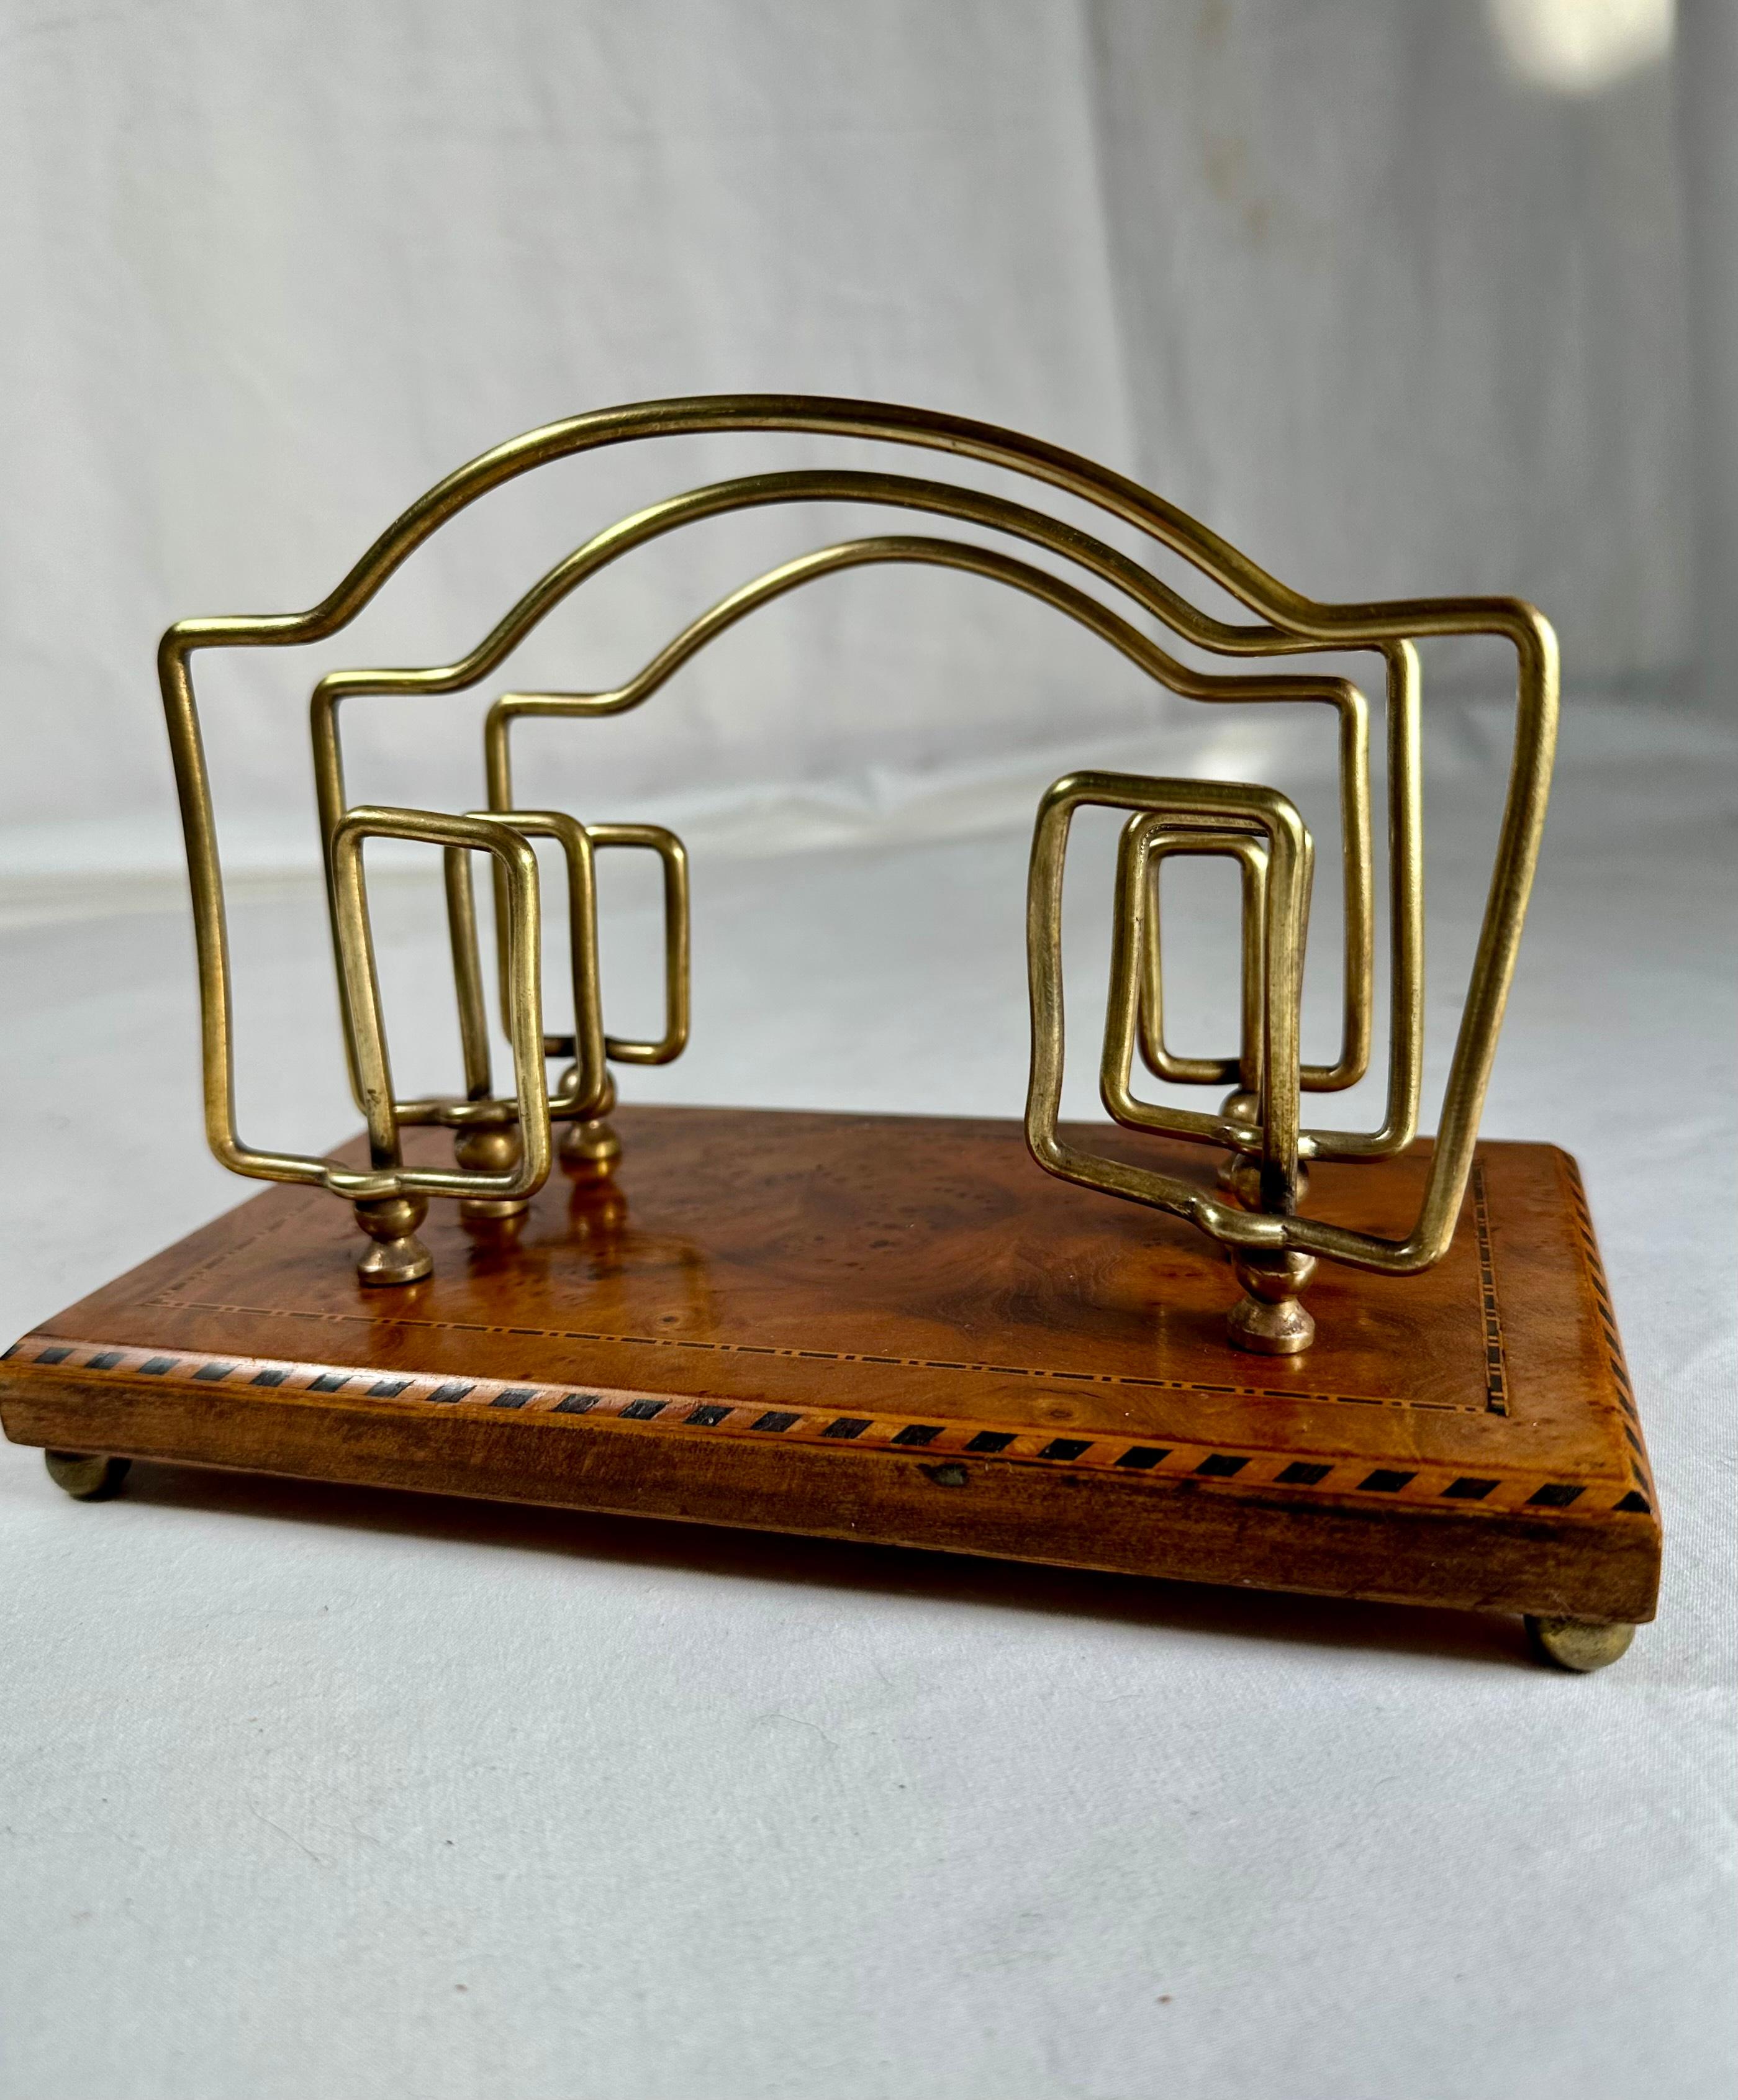 Art Deco French Brass Birdseye Maple Marquetry Desk Letter Holder.

Art Deco, circa 1950s wood inlaid desk letter holder in the style of Jean-Michel Frank; he was an inspired designer much associated with the Art Deco movement.  His modern,